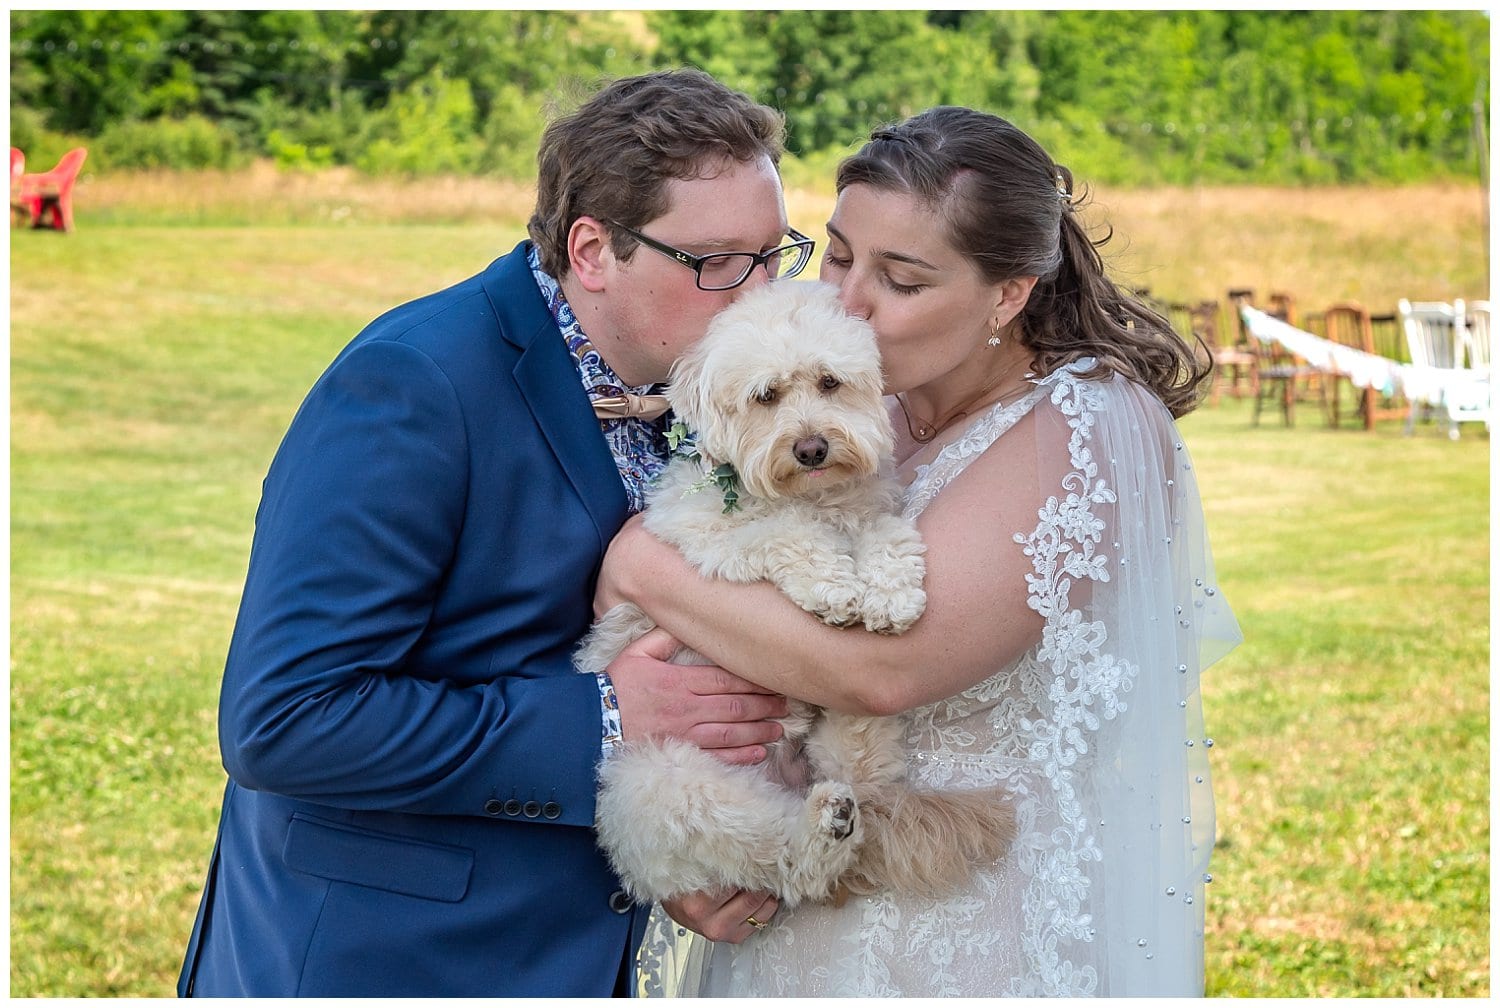 The bride and groom cuddle with their dog Nova during their first look before their wedding ceremony.